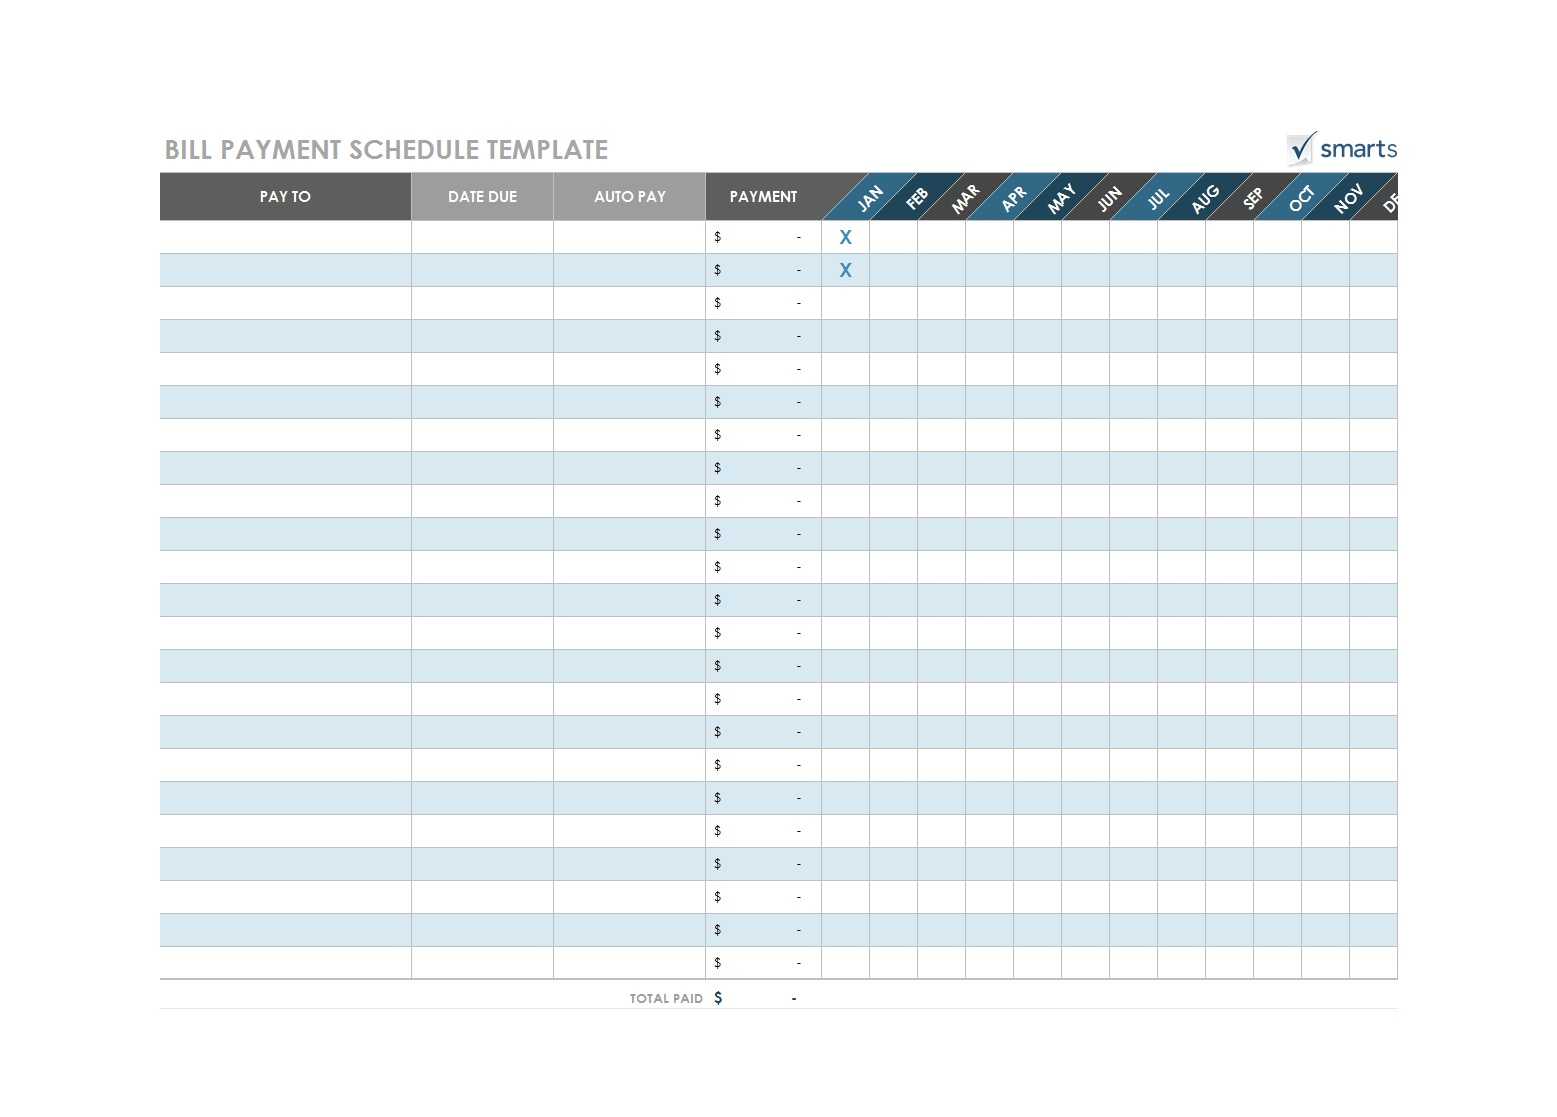 Free Bill Tracking Spreadsheet Pay Checklist Template 18 32 With Regard To Blank Checklist Template Pdf